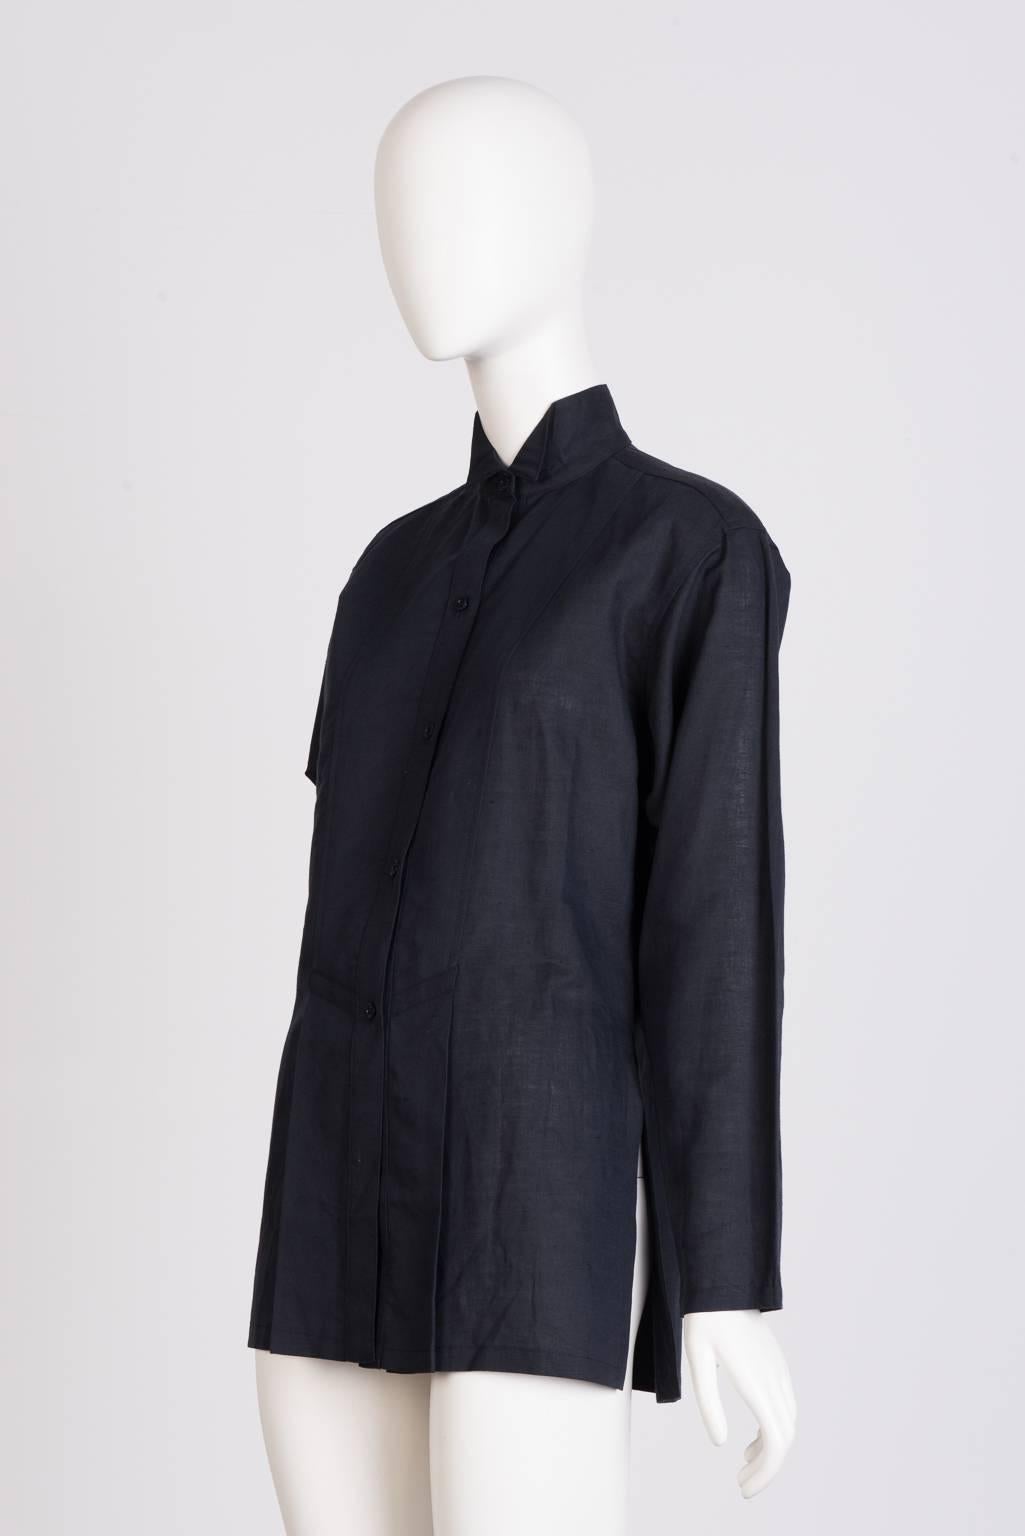  Five button shirt in black linen with flat, split pleats and bow tie collar